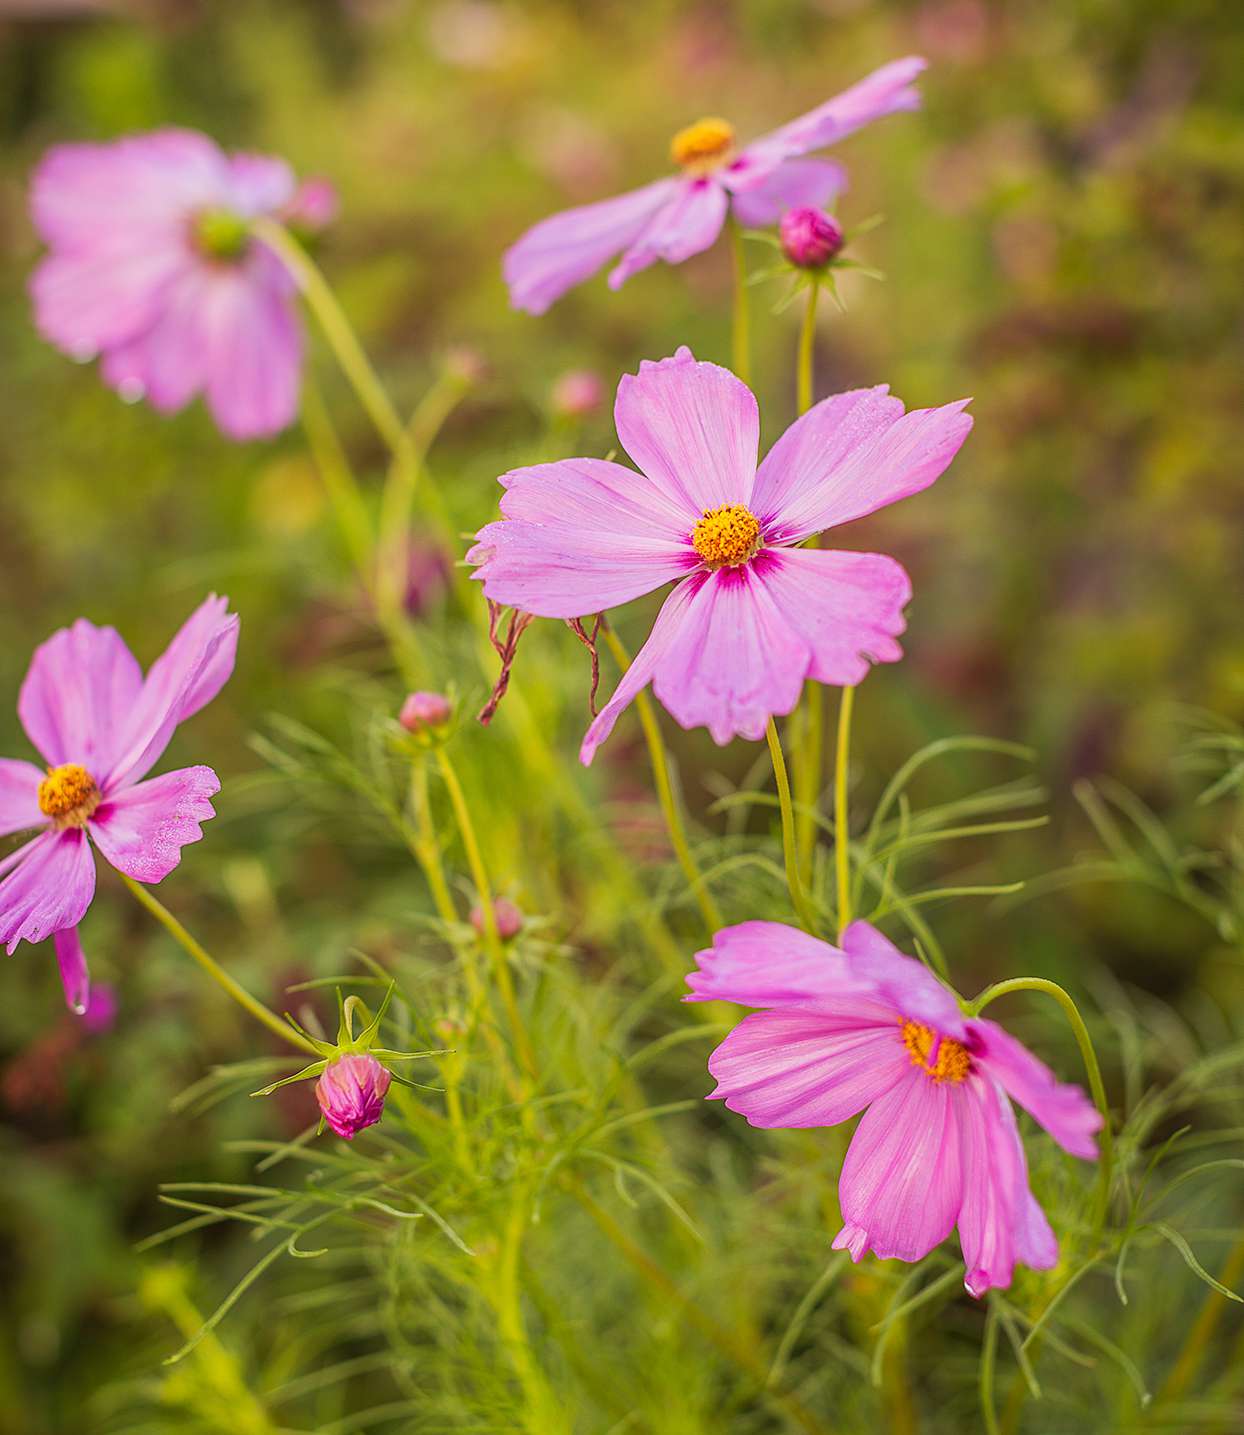 pink cosmos growing in field with green foliage